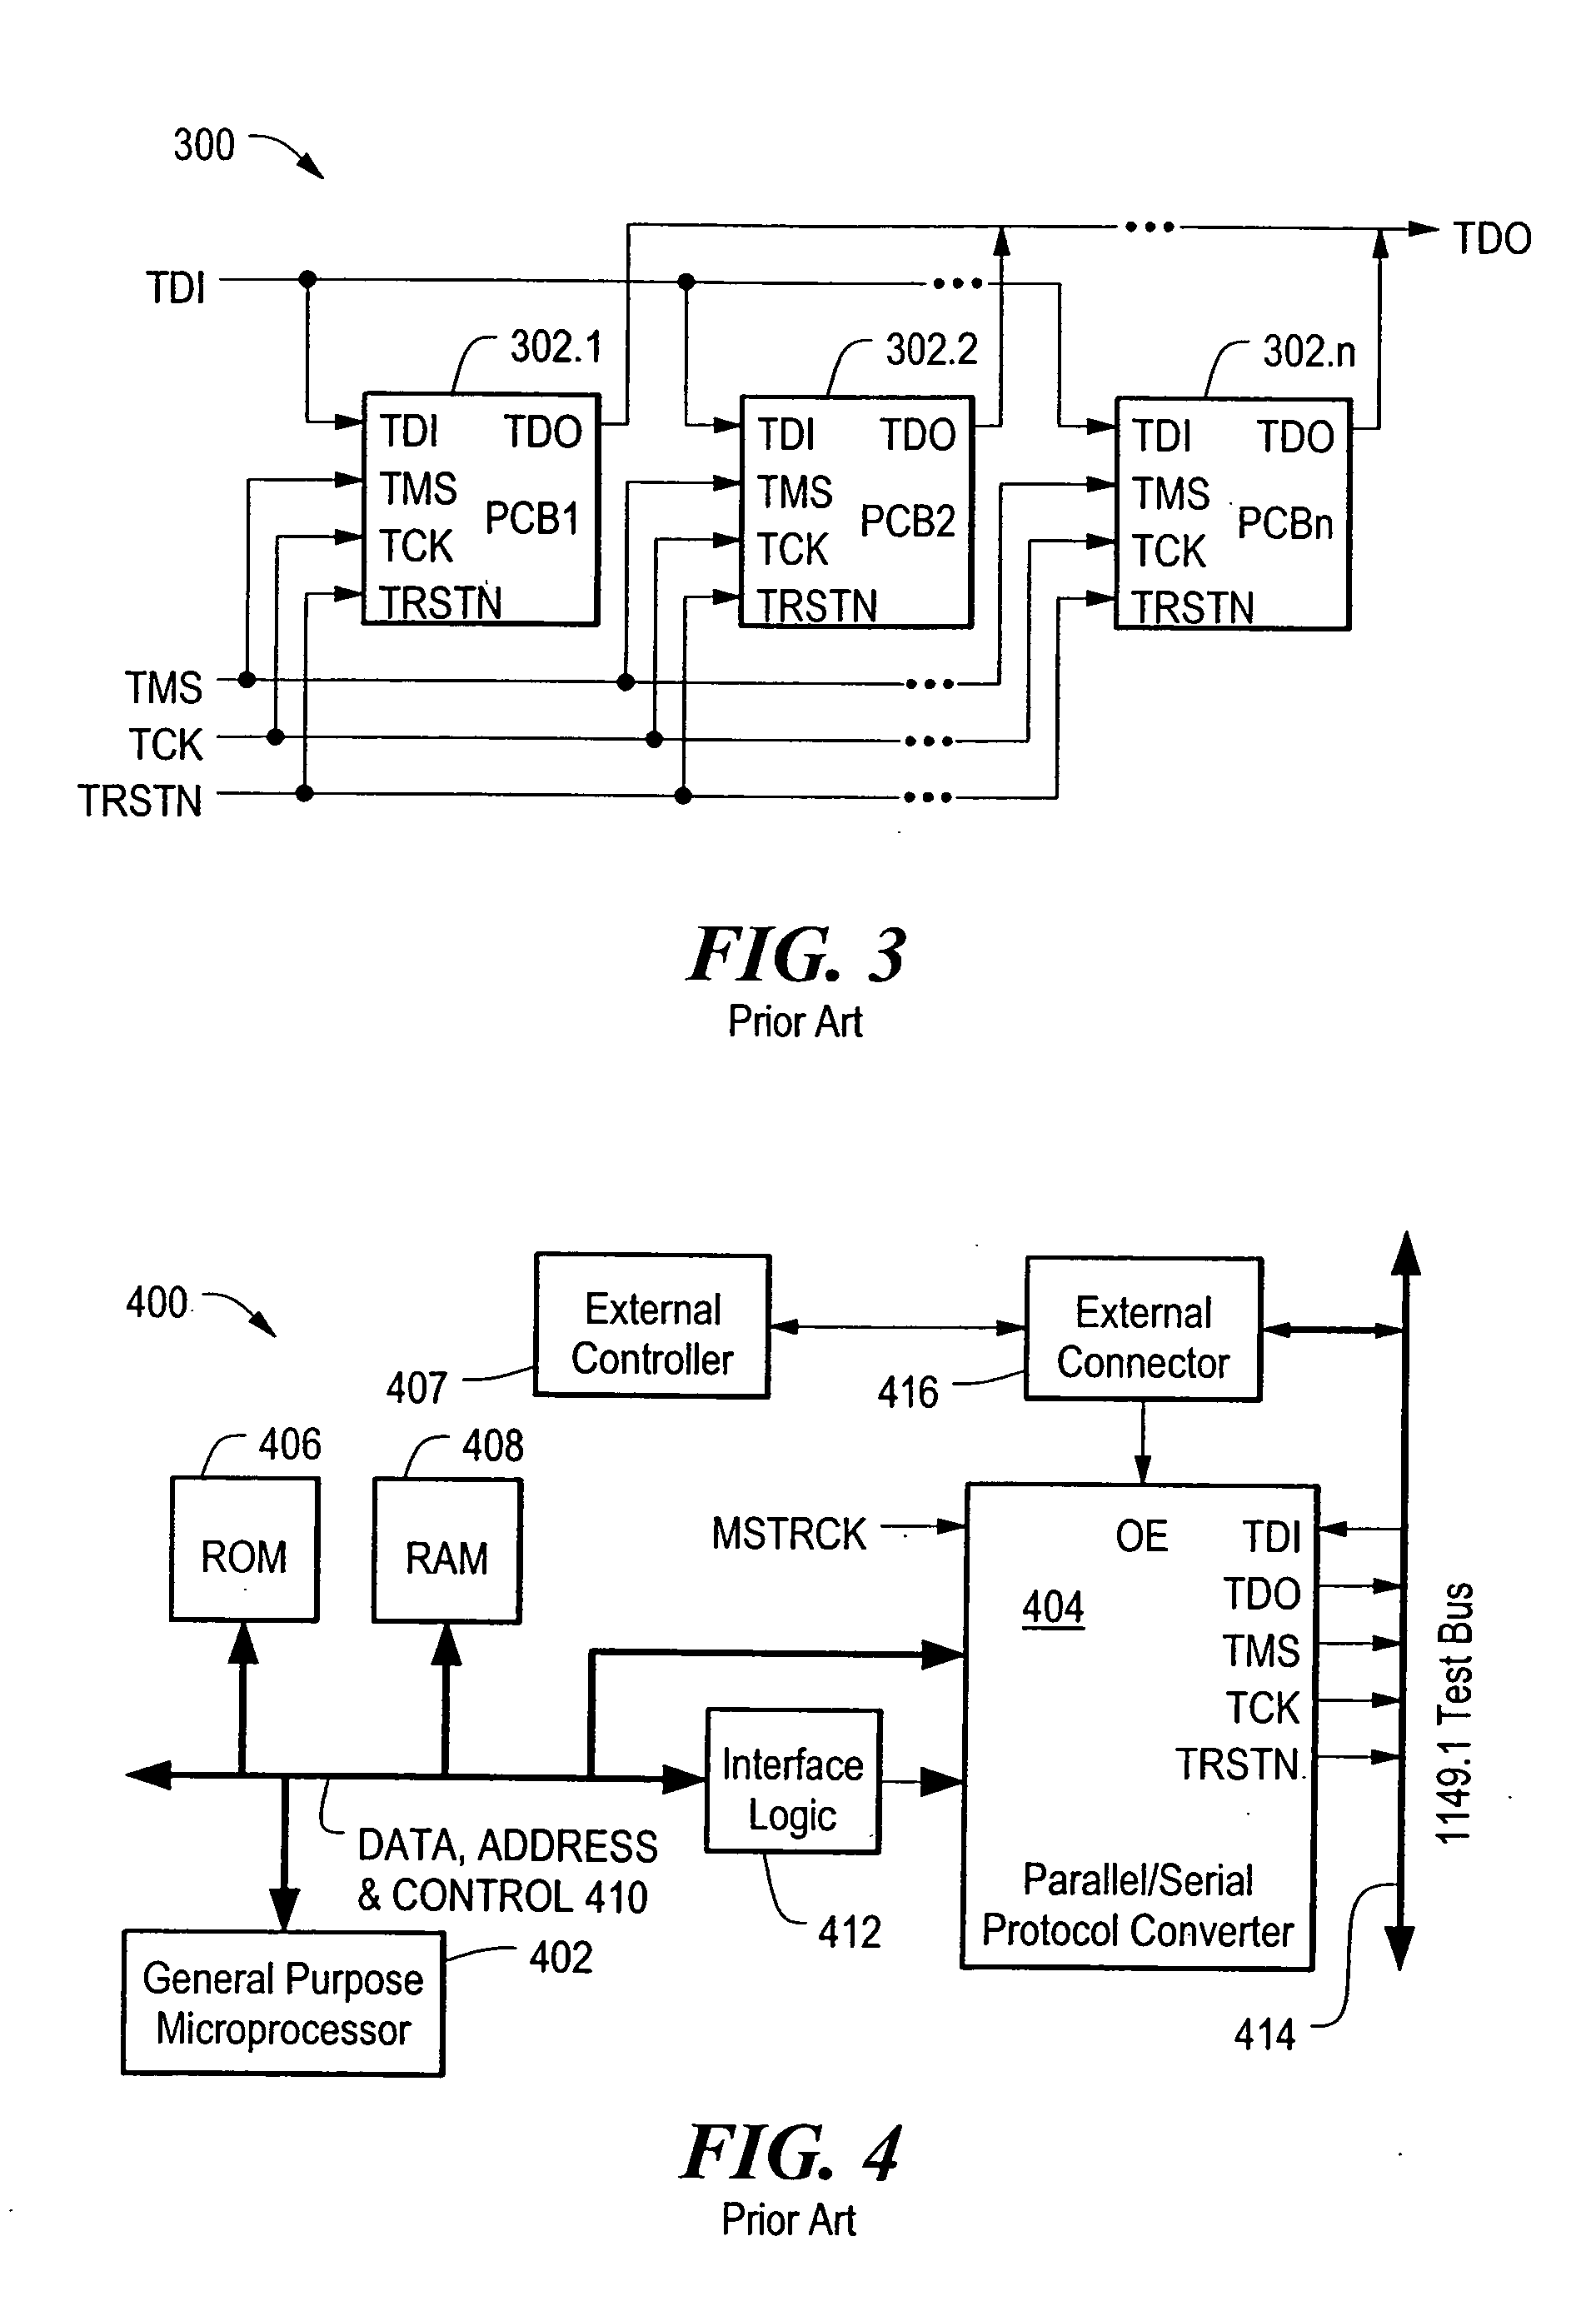 Method and apparatus for embedded Built-In Self-Test (BIST) of electronic circuits and systems